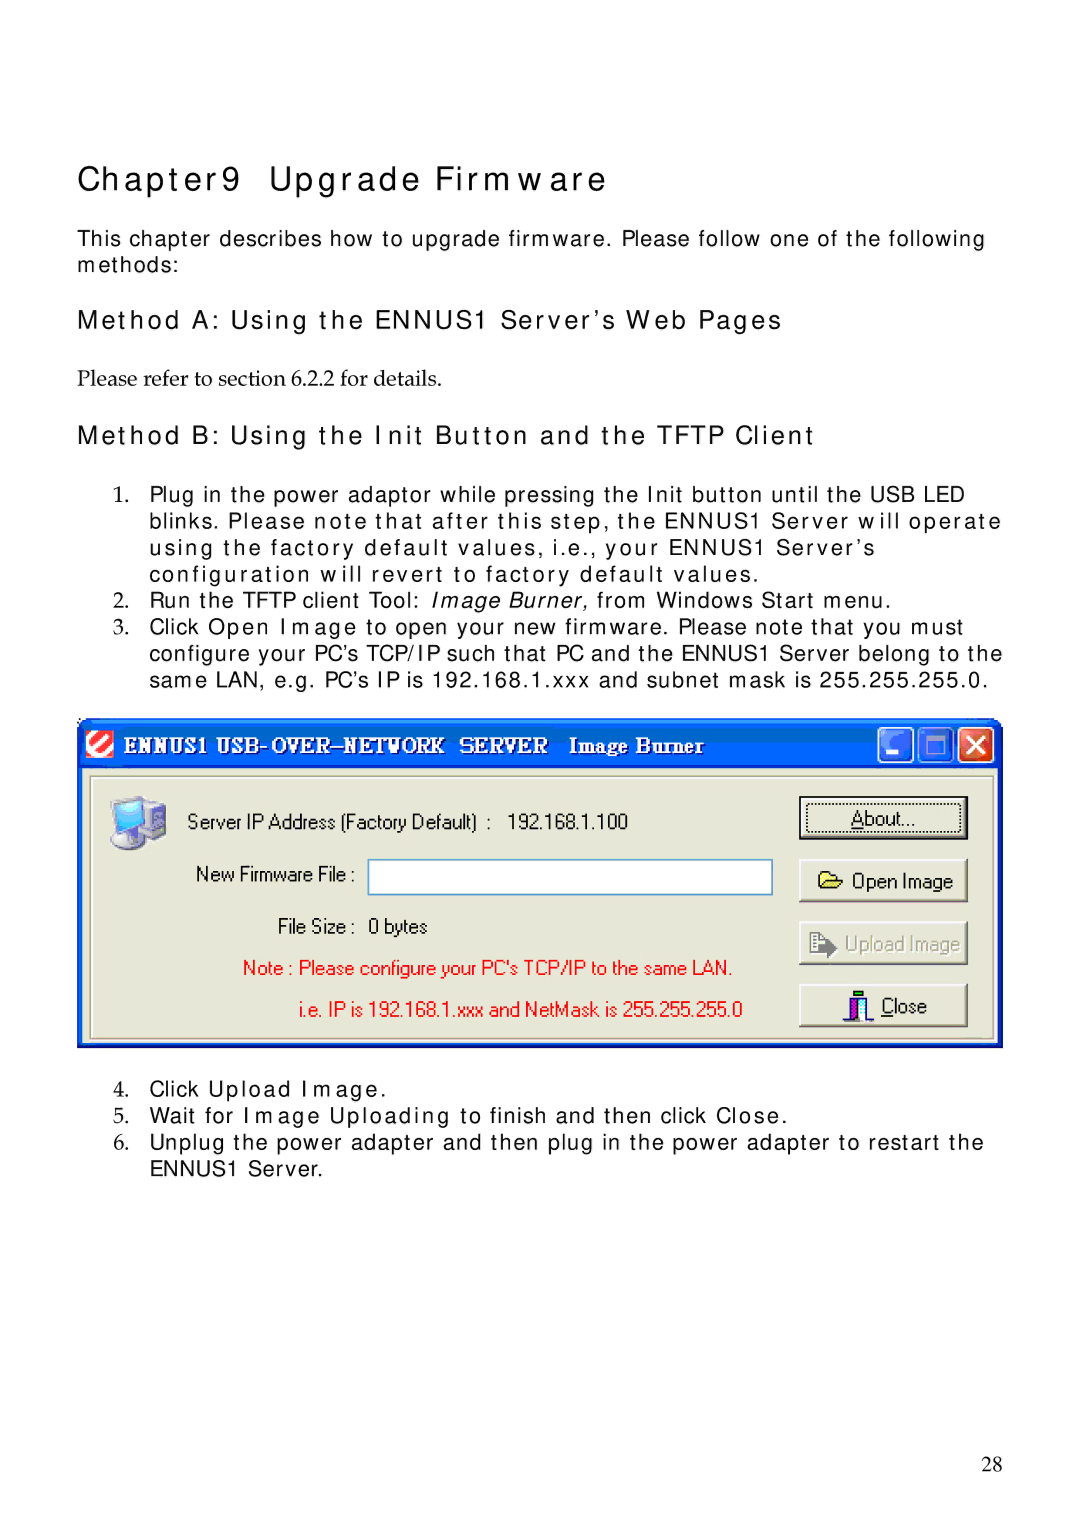 Encore electronic user manual Upgrade Firmware, Method a Using the ENNUS1 Server’s Web Pages, Click Upload Image 